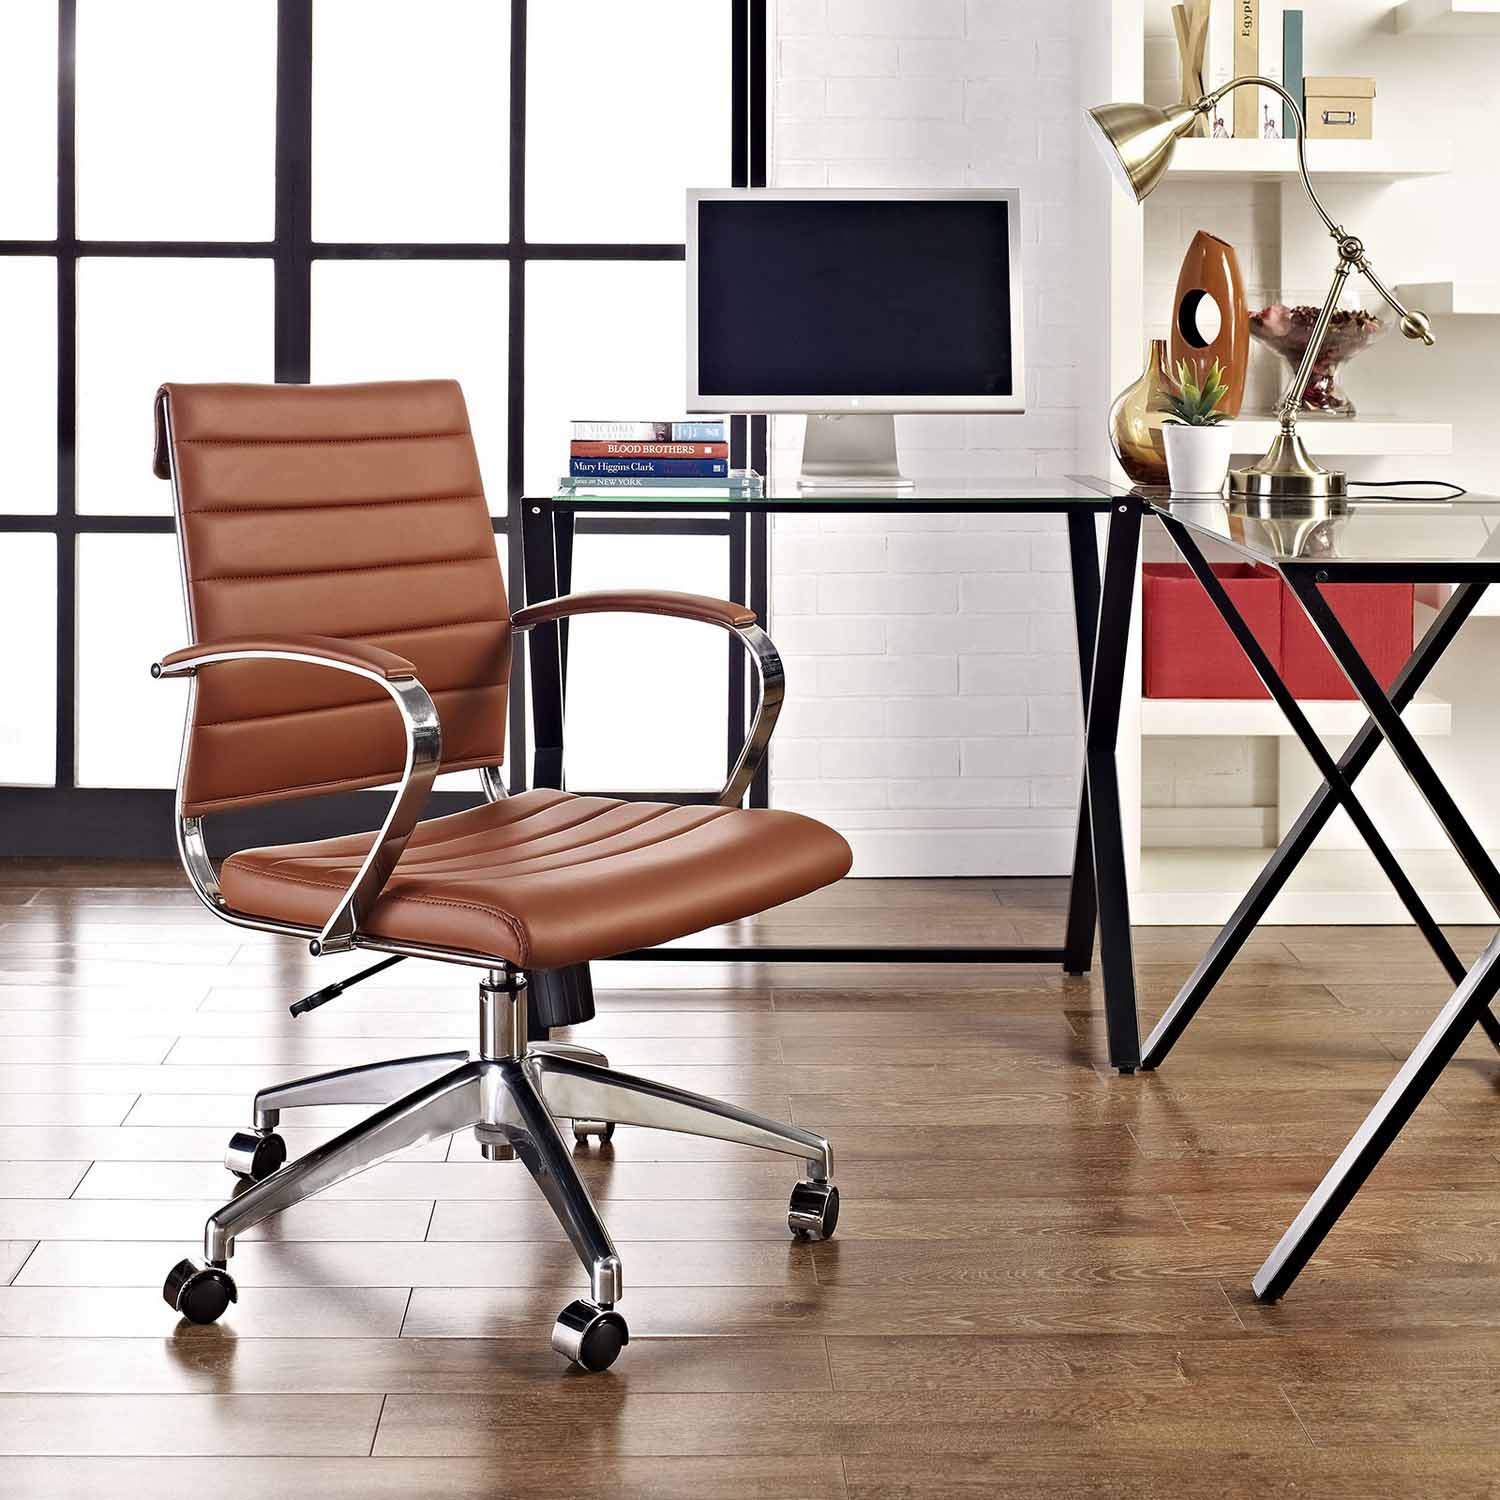 Modway Jive Mid Back Office Chair - Terracotta